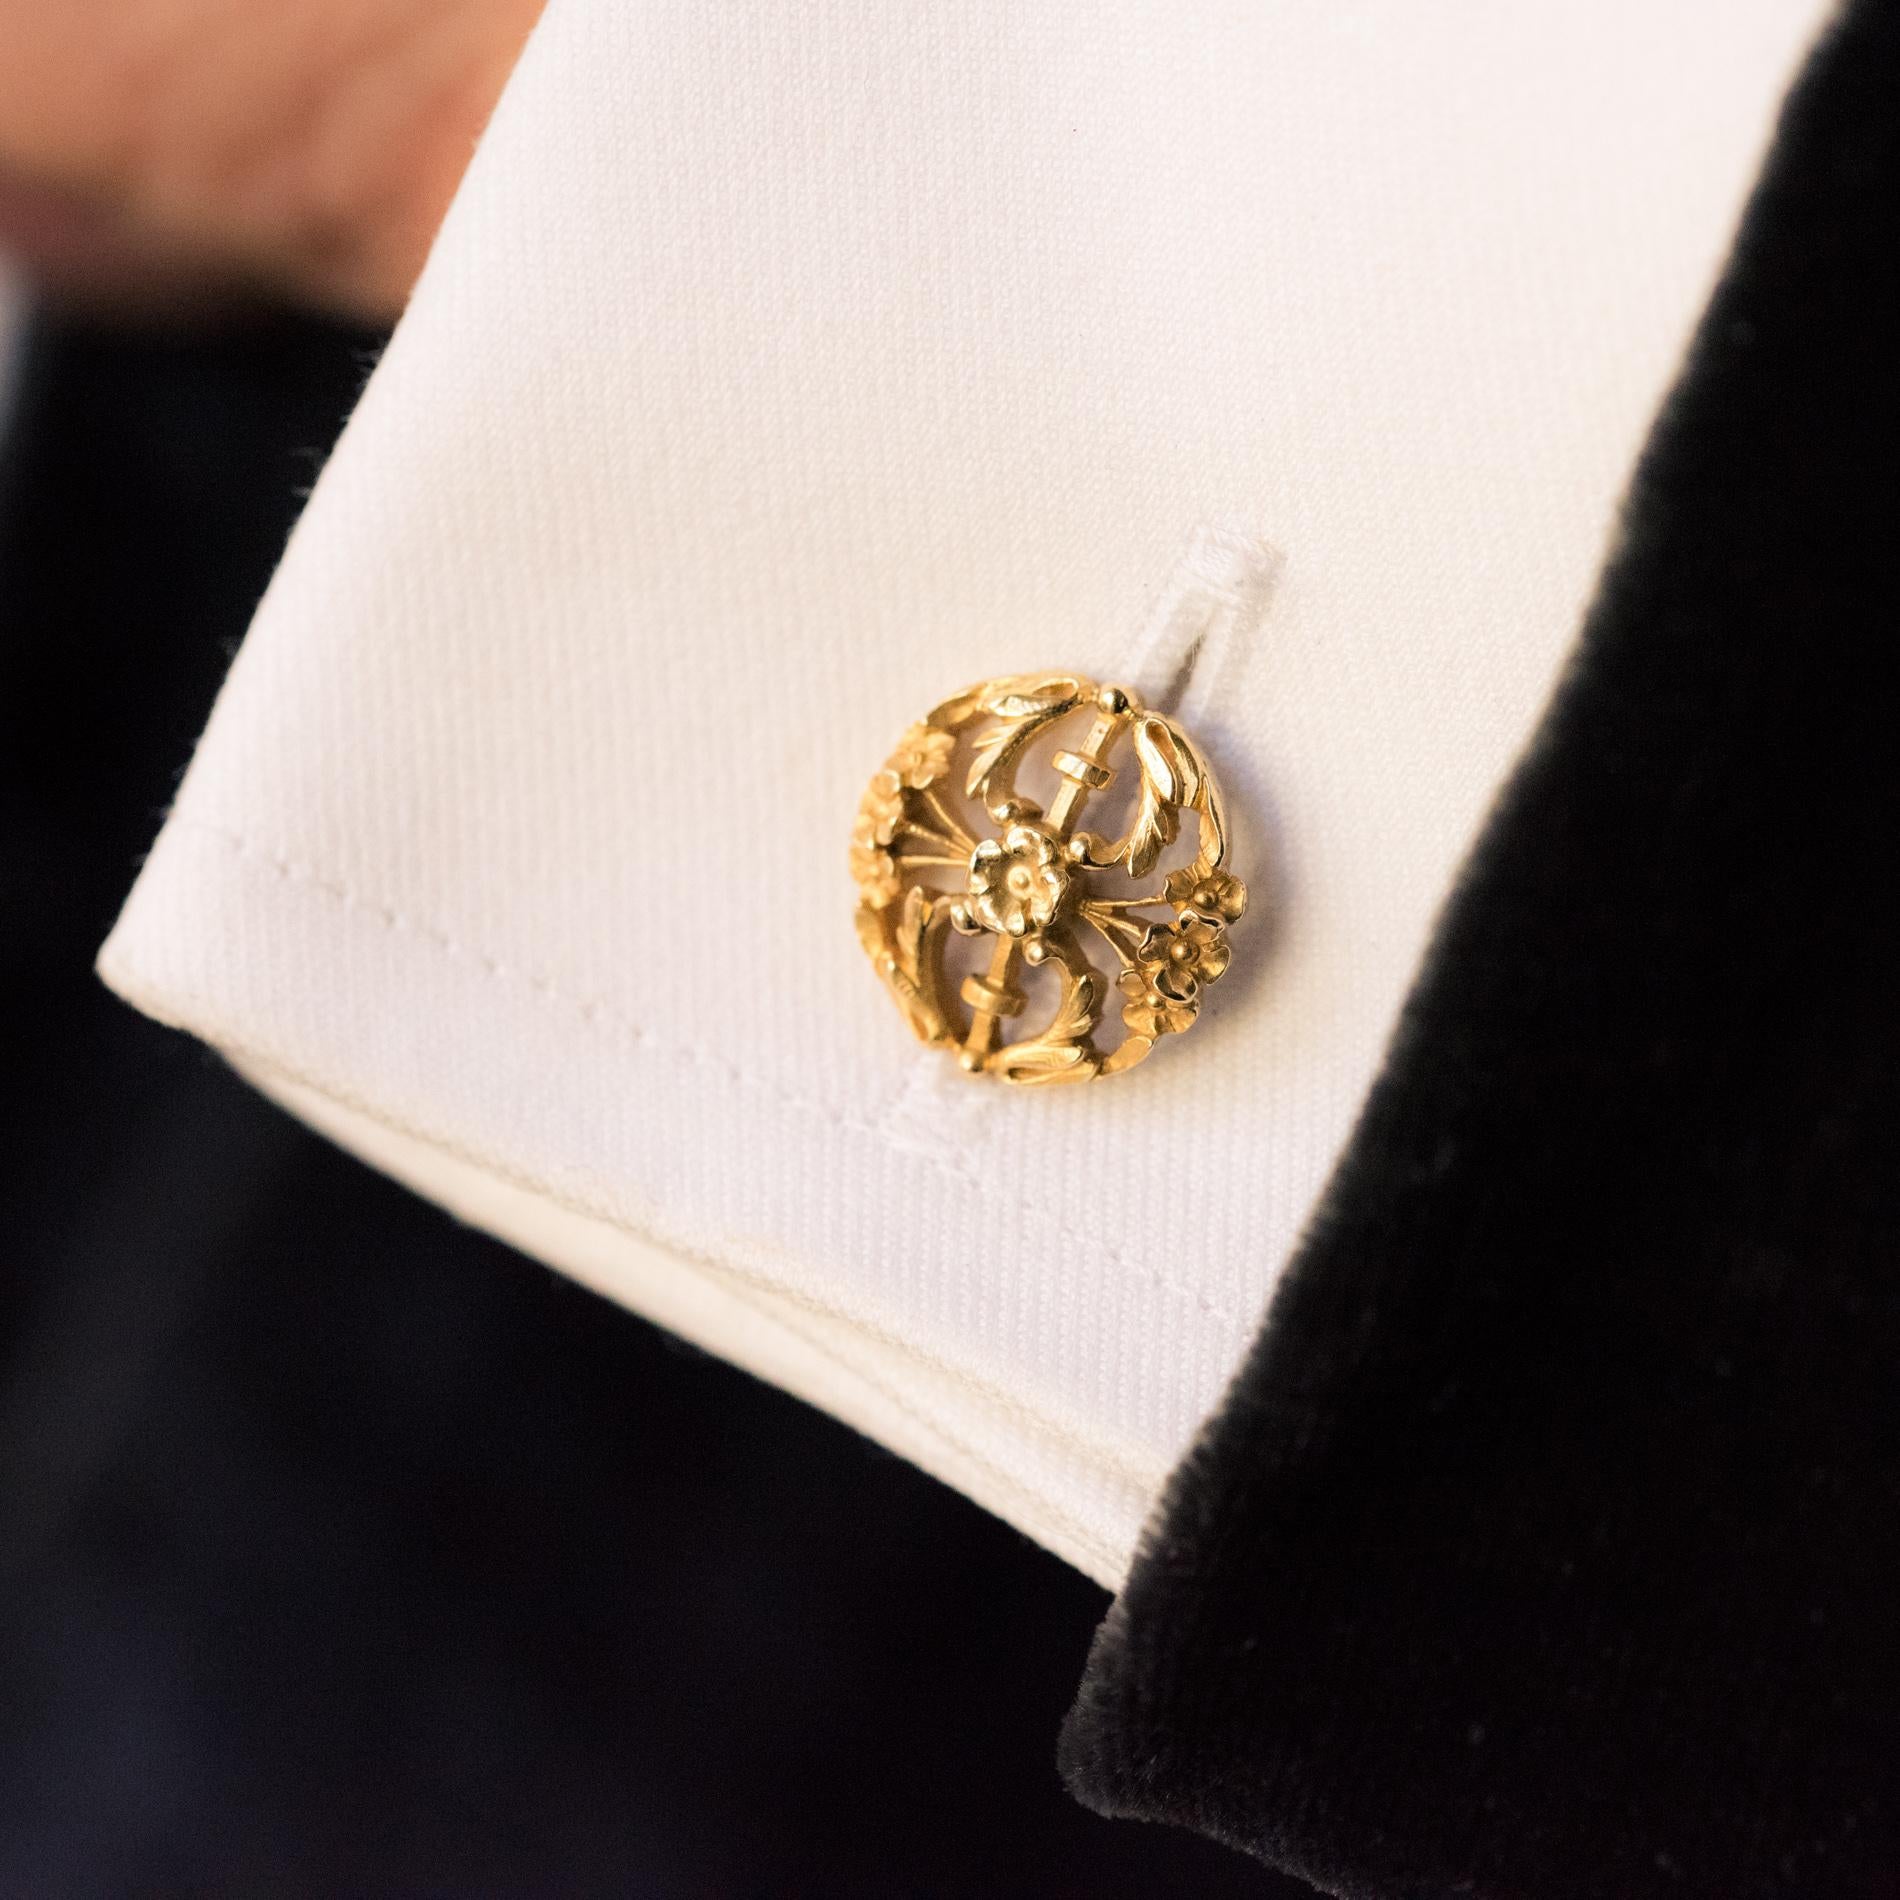 Pair of cufflinks in 18 carats yellow gold, eagle's head hallmark.
Round in shape, these antique cufflinks are pierced with flowers and foliage. They are connected by a curved rod, to a shuttle of the same decor, swiveling to attach to the